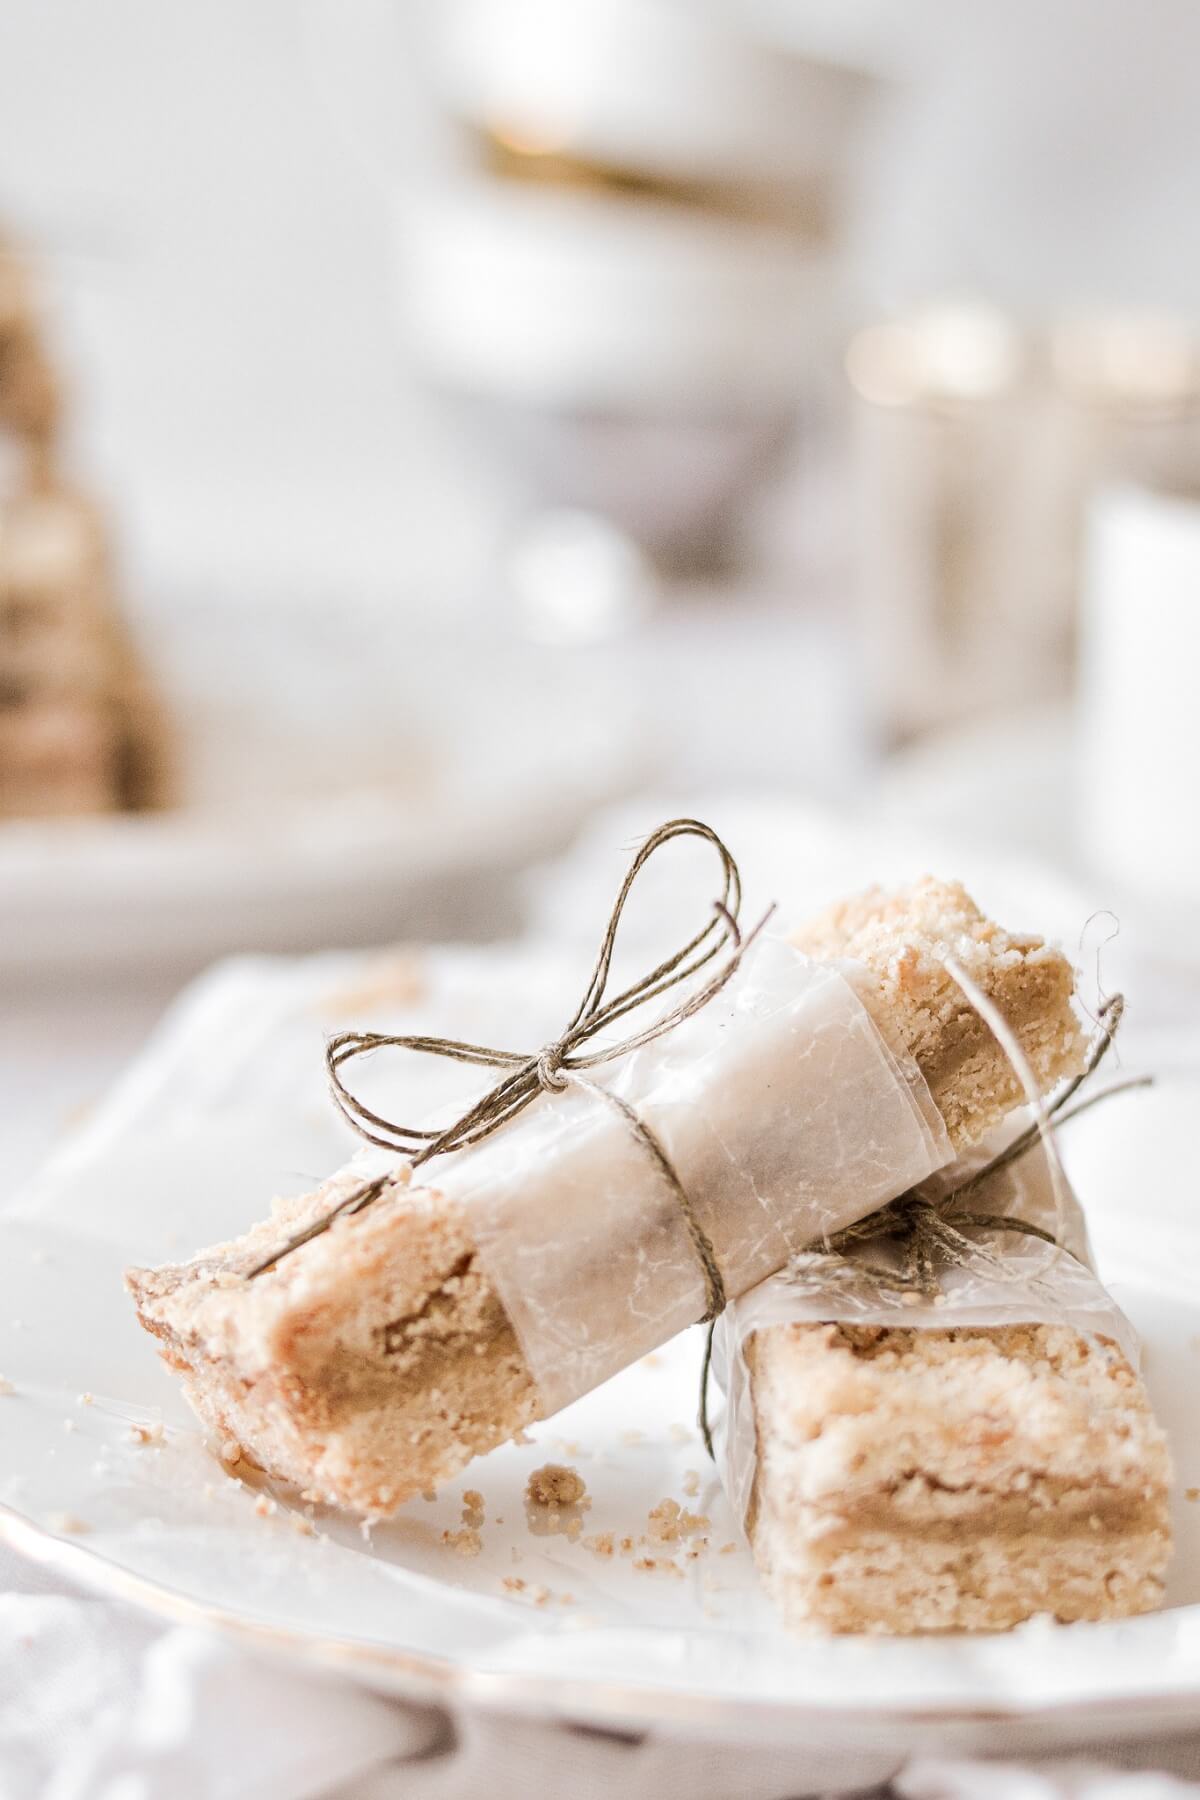 Almond crumb bars wrapped in wax paper and twine.